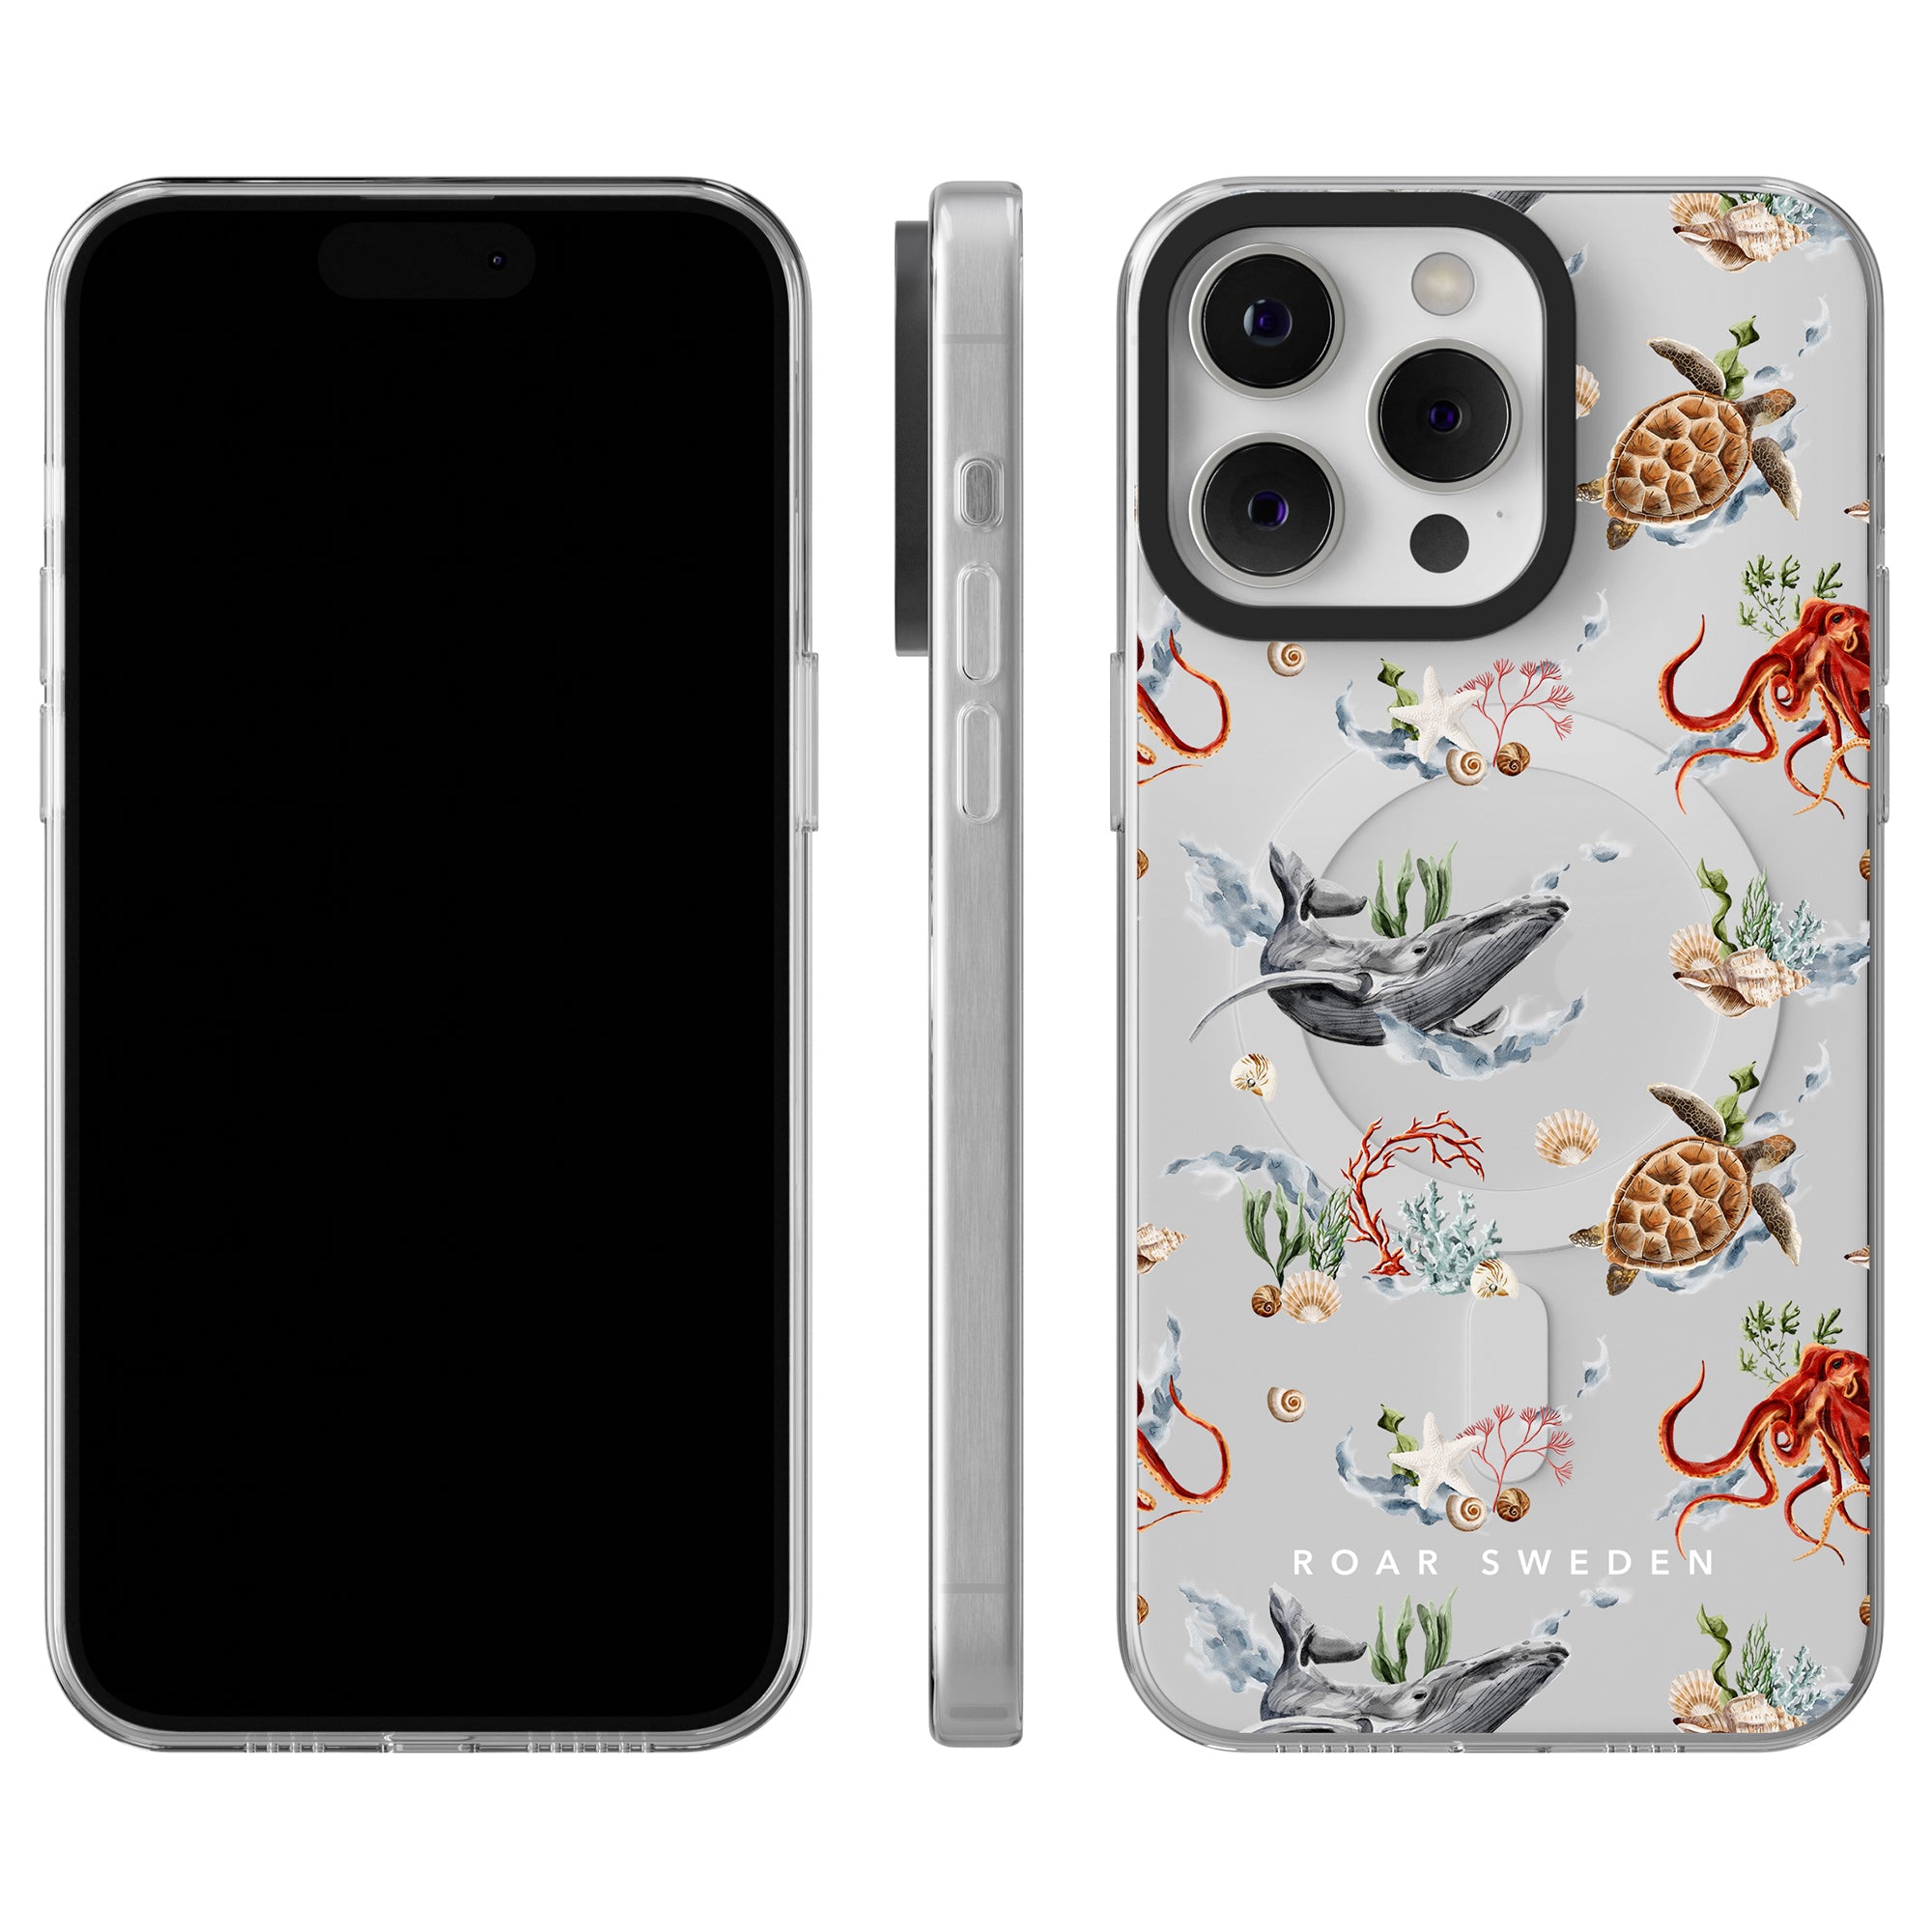 A smartphone with an ocean life-themed case featuring whales, turtles, and octopuses from the "Ocean Collection." The stylish Deep - MagSafe has the "ROAR SWEDEN" brand printed on the bottom. The phone is shown from the front, side, and back.